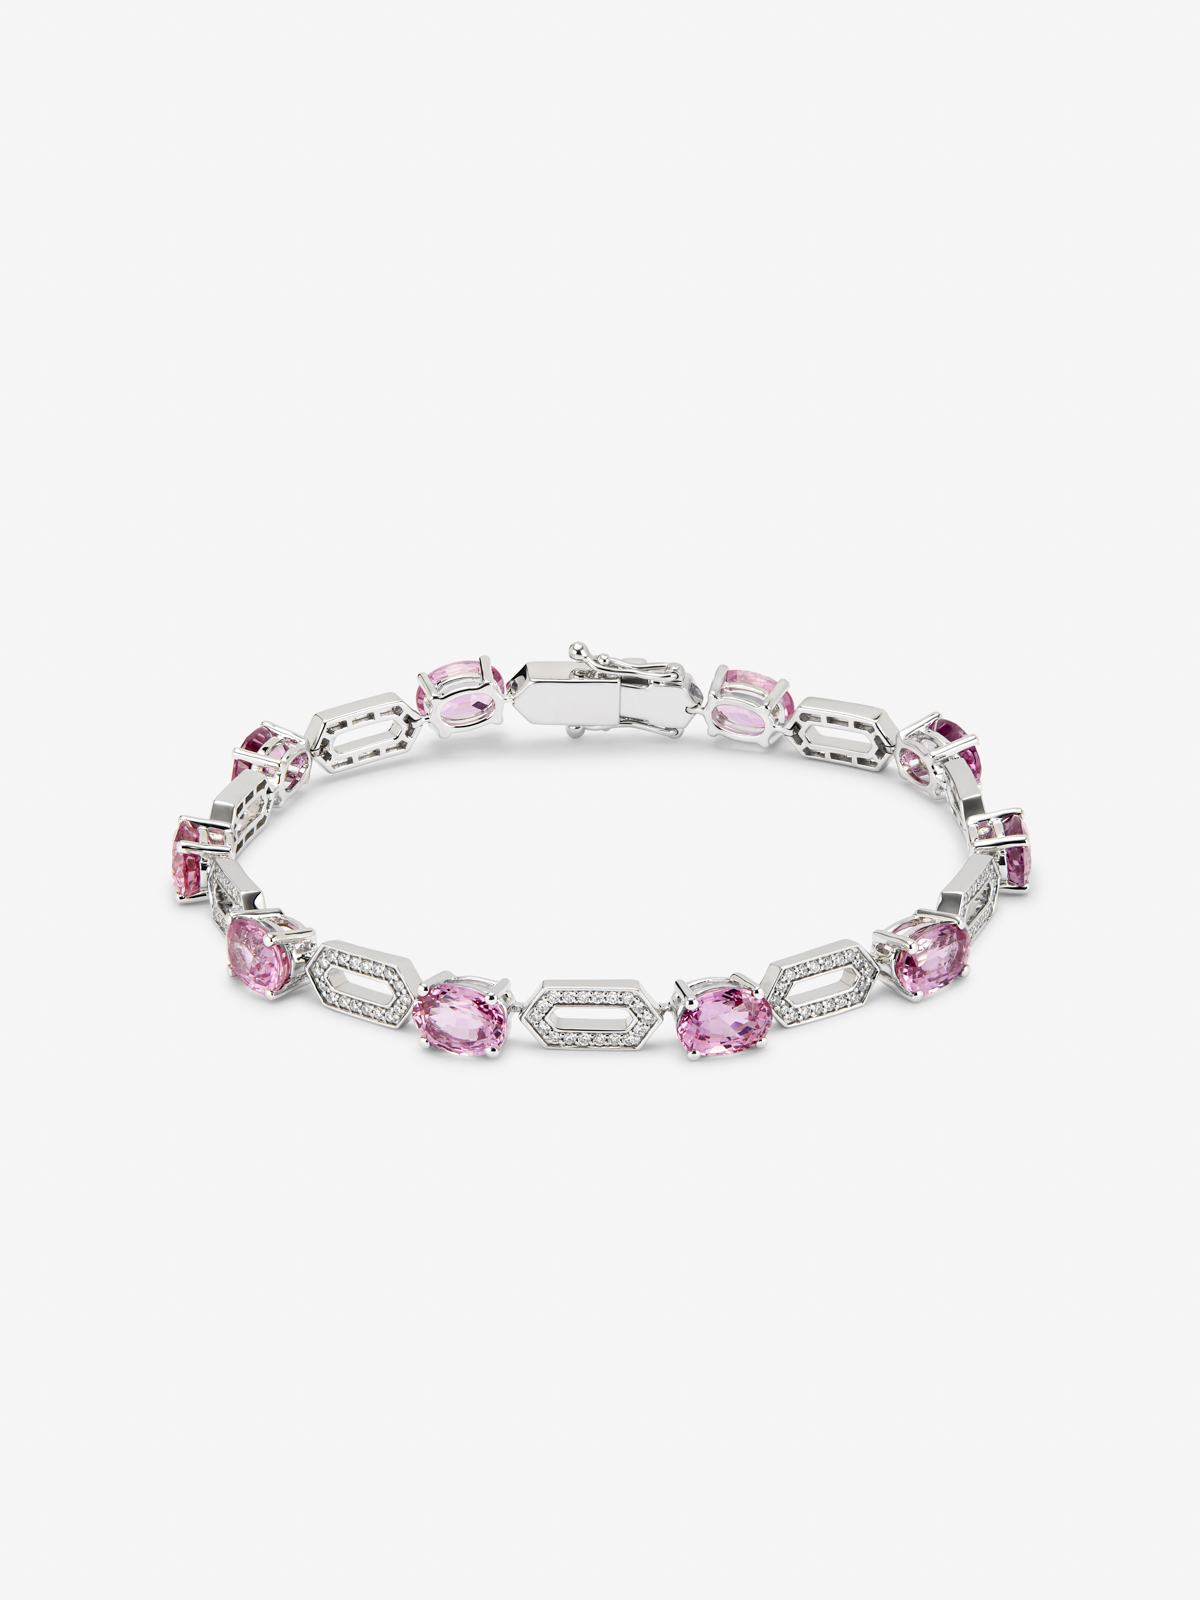 18K White Gold Bracelet with pink sapphires in 11.22 cts and white diamonds in a bright 0.66 cts diamonds